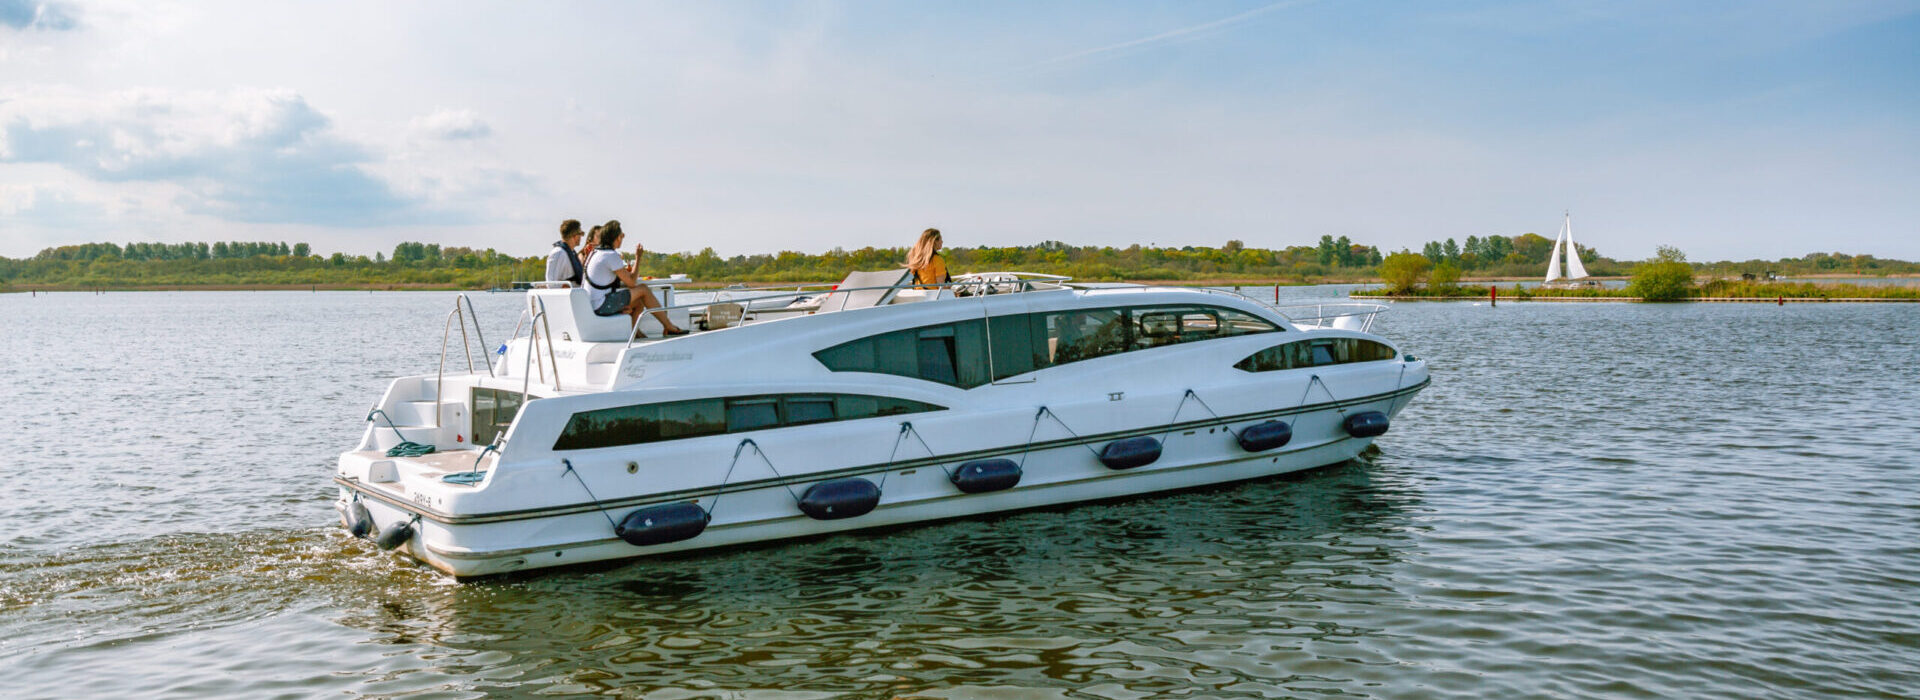 Why Choose Richardson’s for a Boating Holiday?